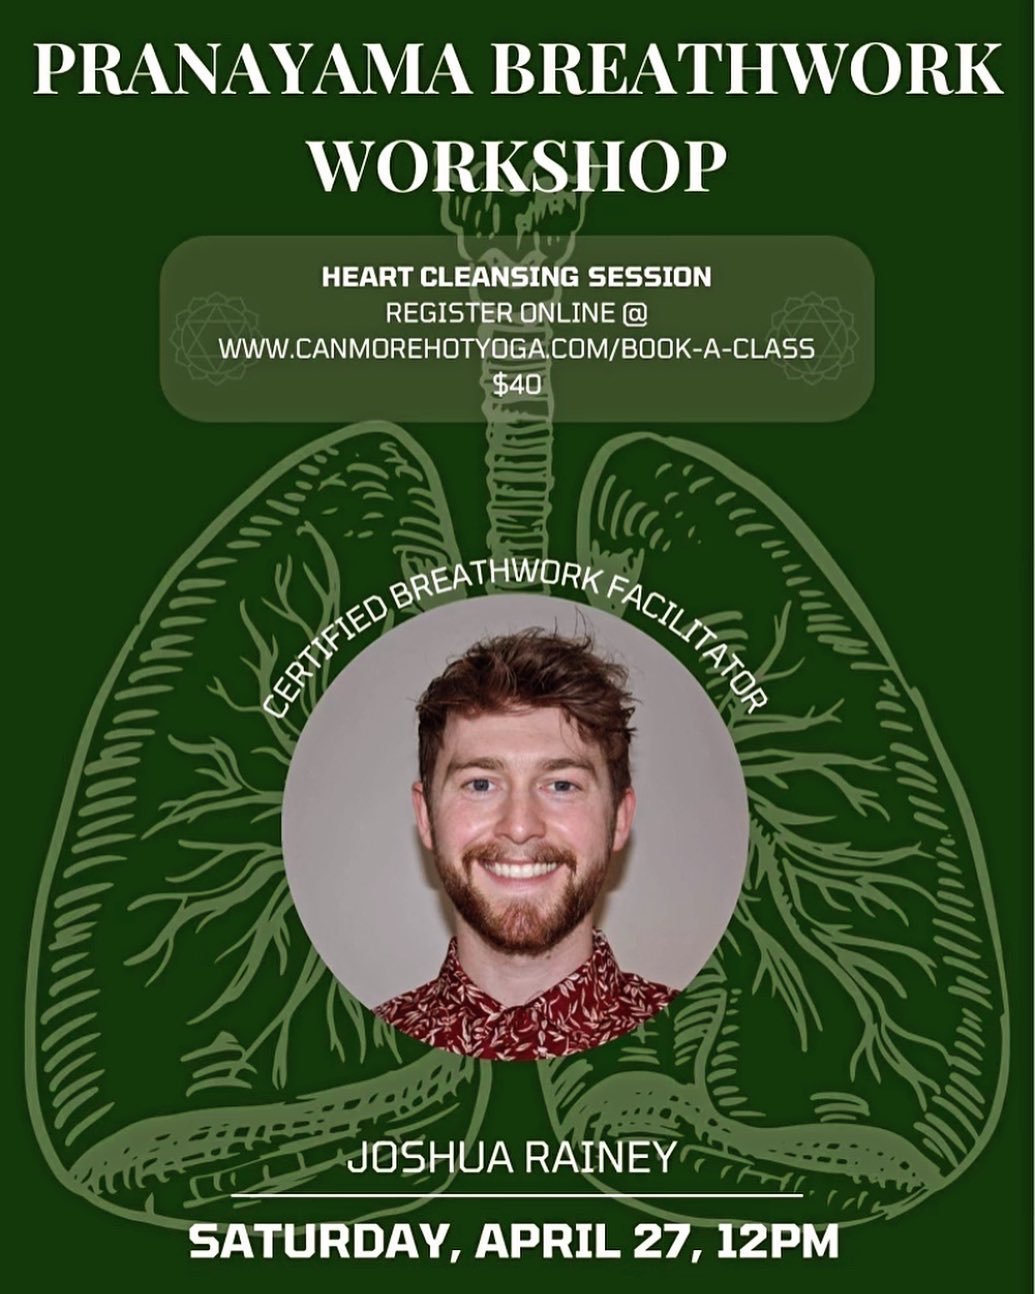 Breath work, also known as conscious breathing, is a practice that involves using breathing techniques to improve mental, physical, and spiritual well-being, join Josh this Saturday to experience it for yourself!

Link in bio!